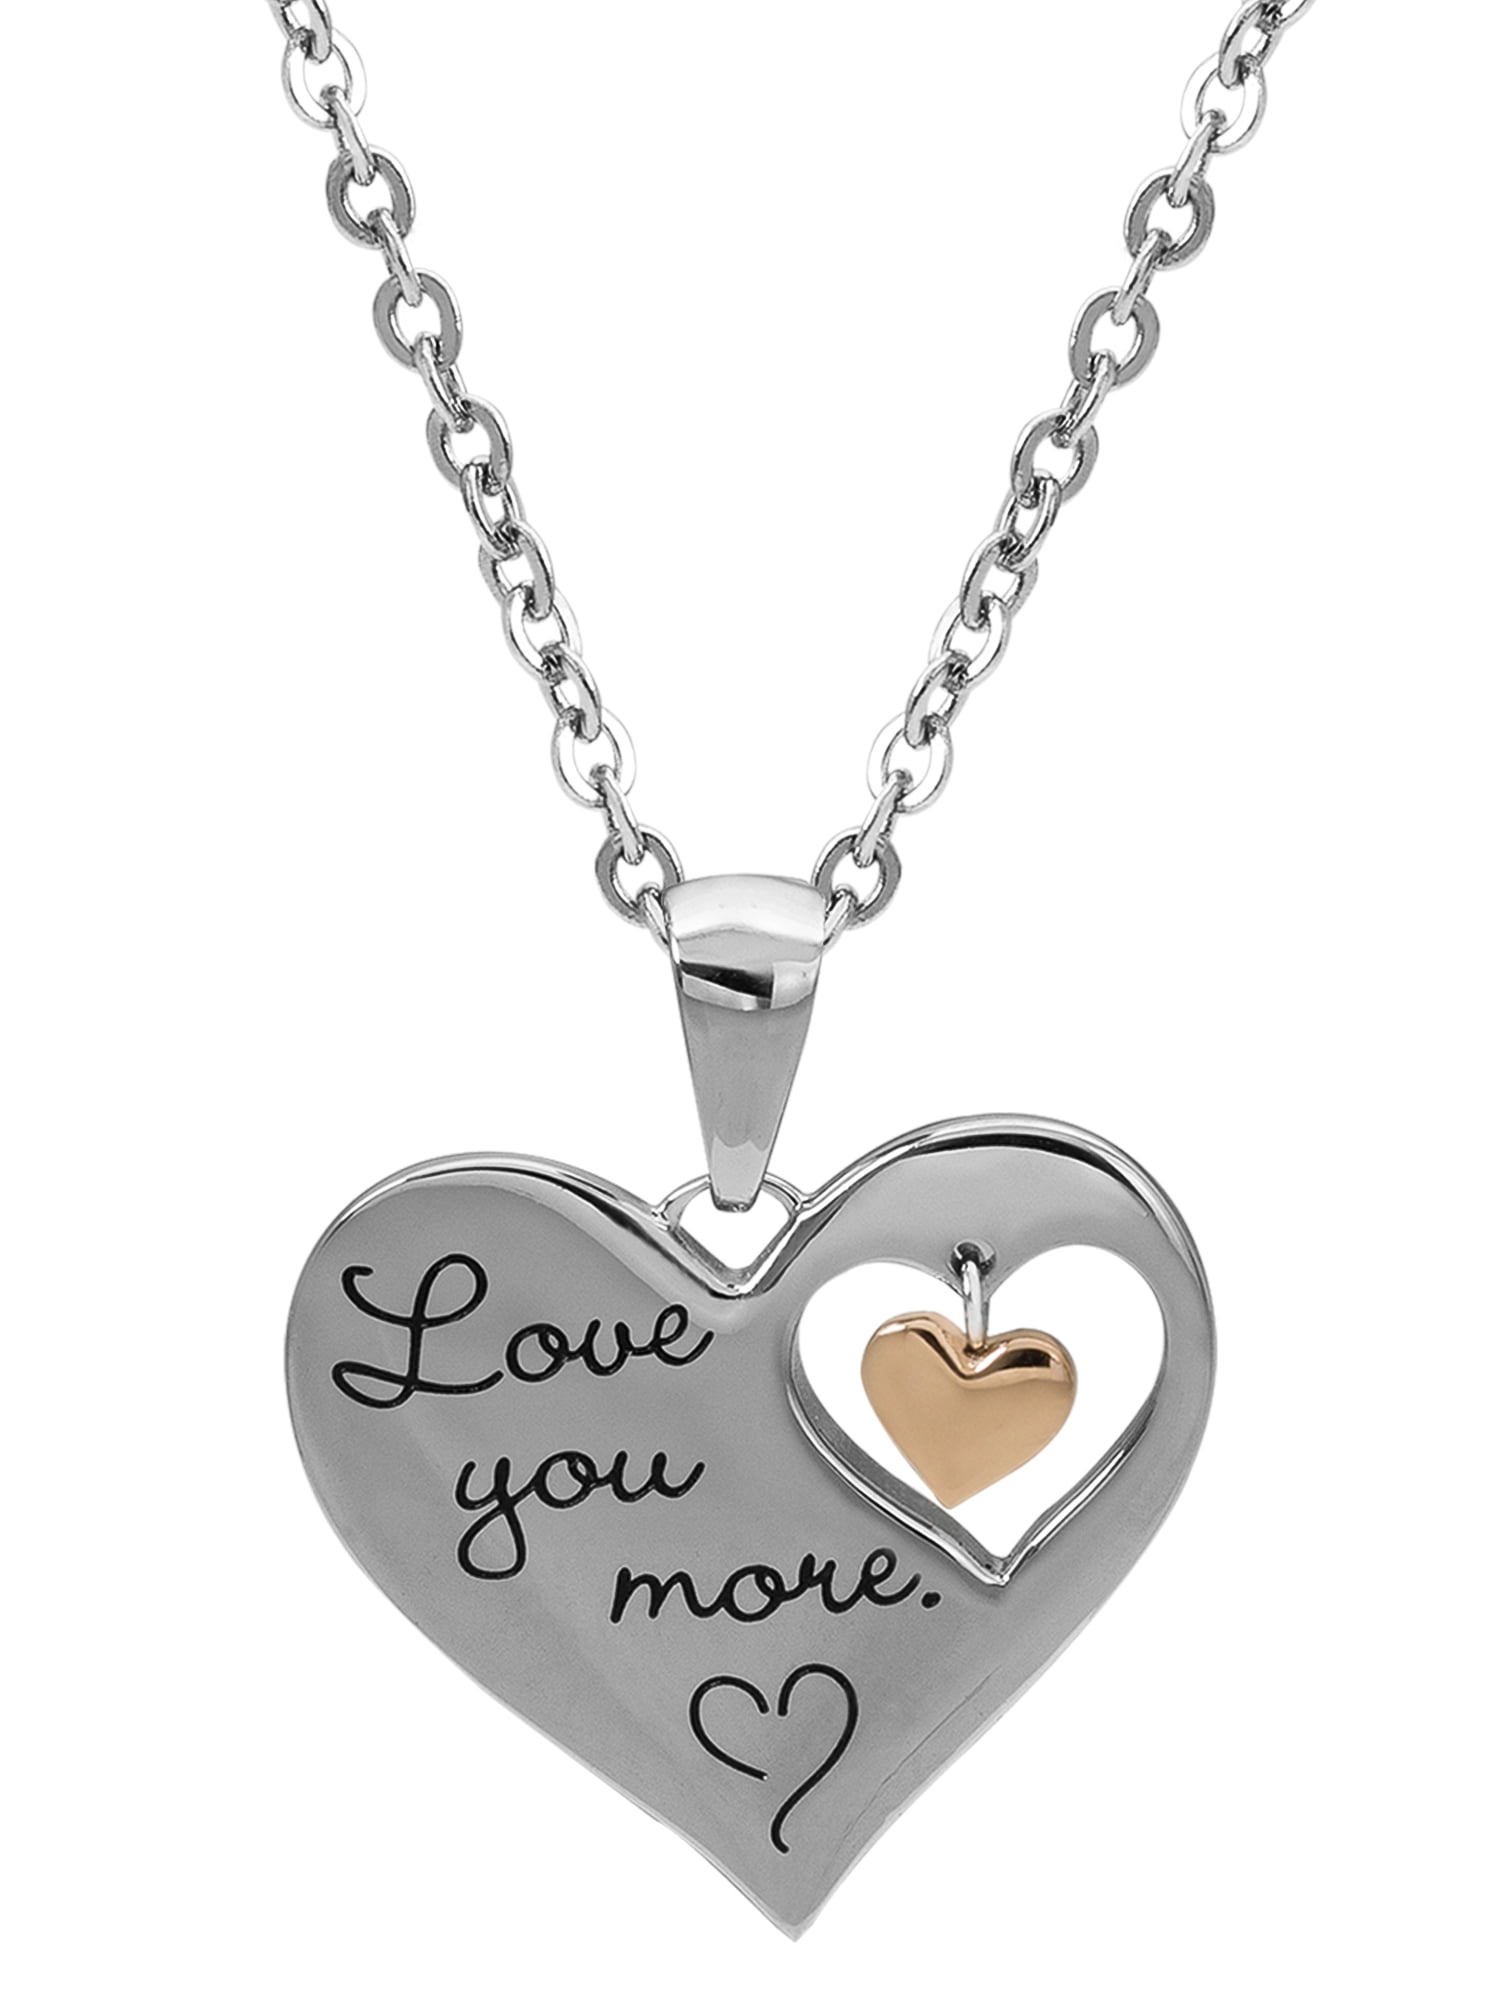 Stainless Steel Necklace For Women Man Lovers Leaves Gold And Silver Color Pendant Necklace Engagement Jewelry